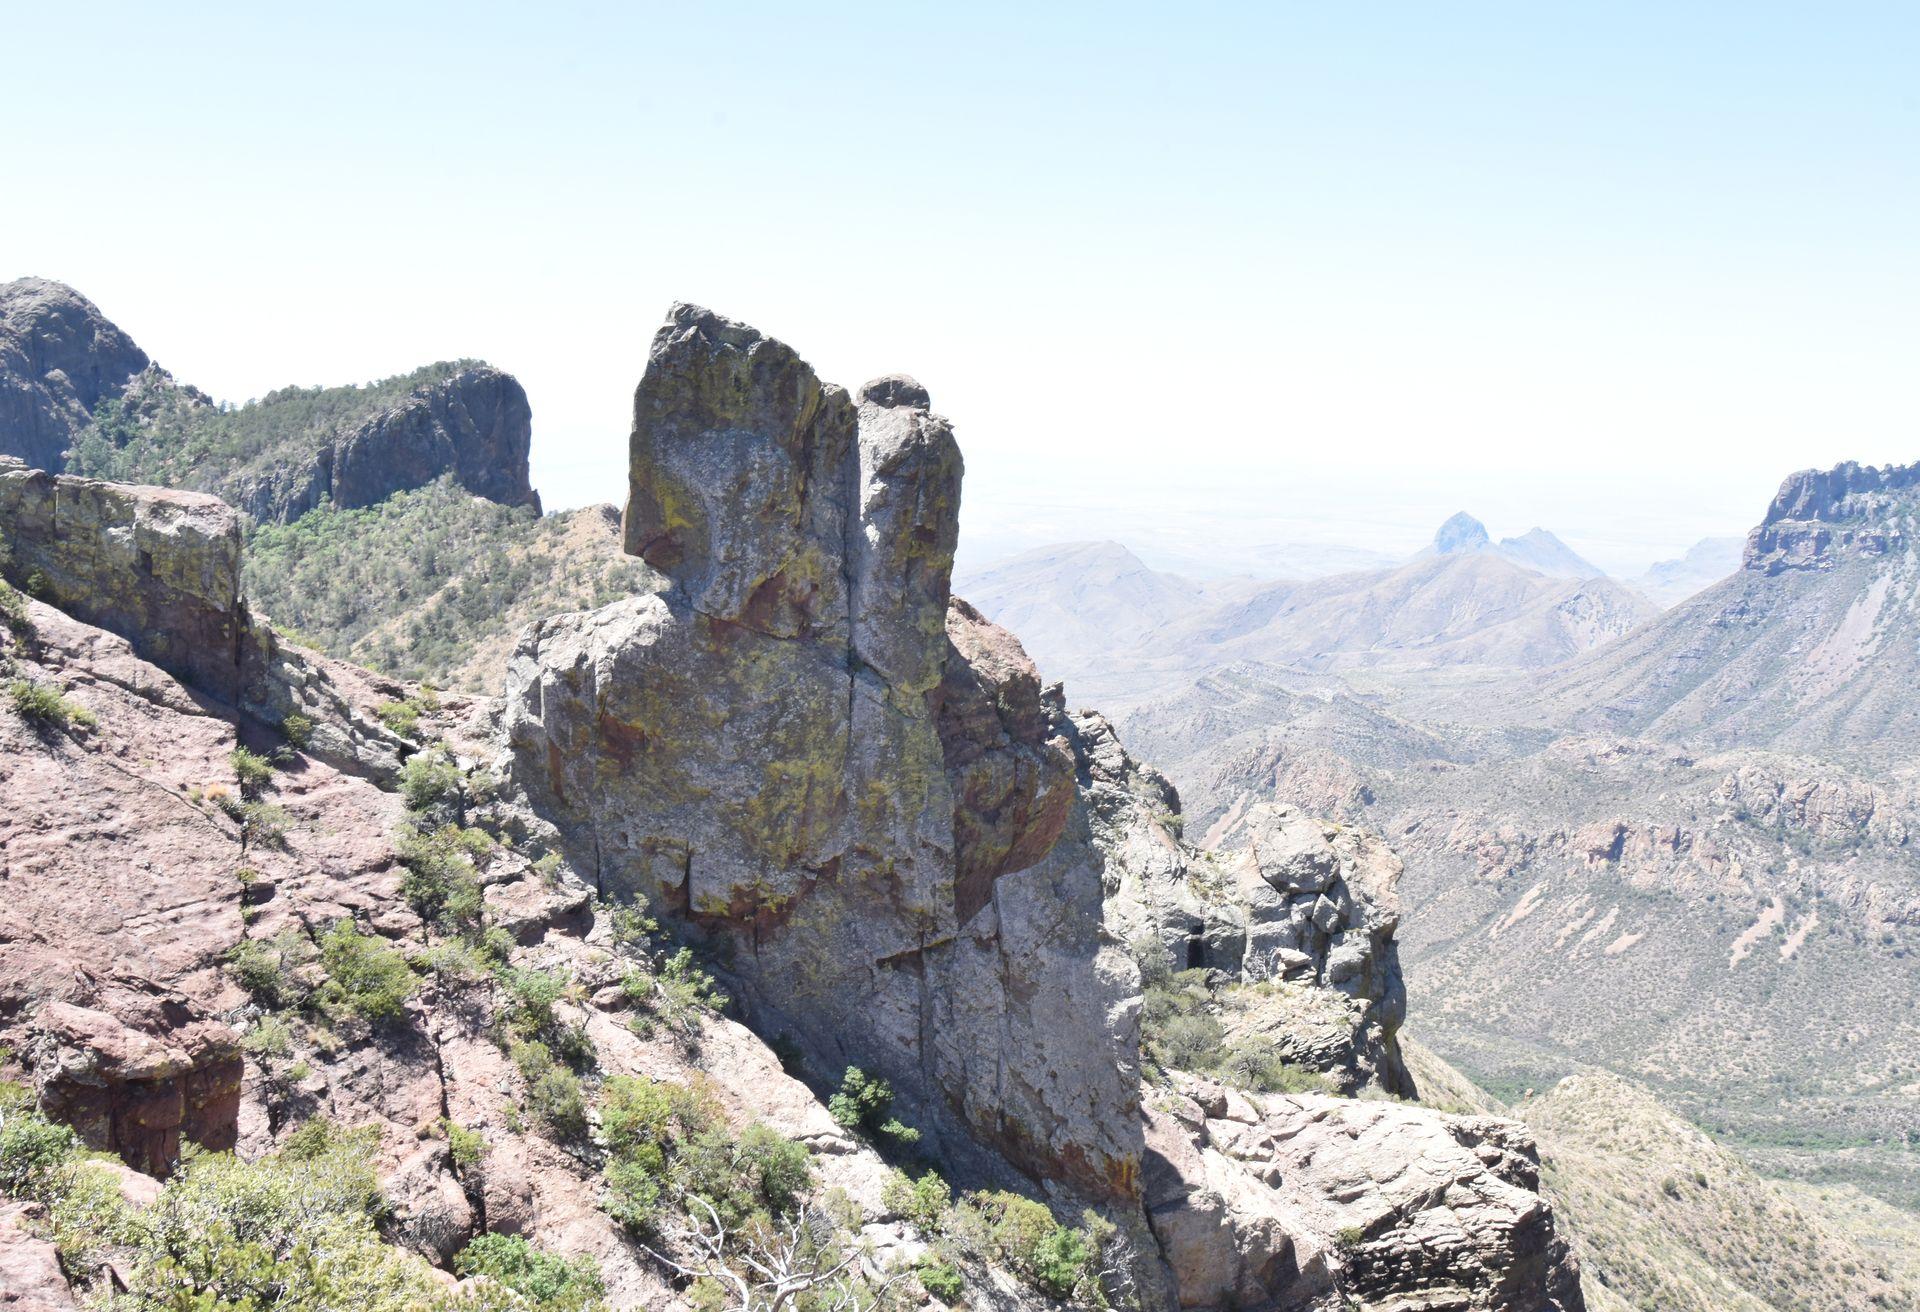 A view of a giant rock off of the Lost Mine trail in Big Bend National Park